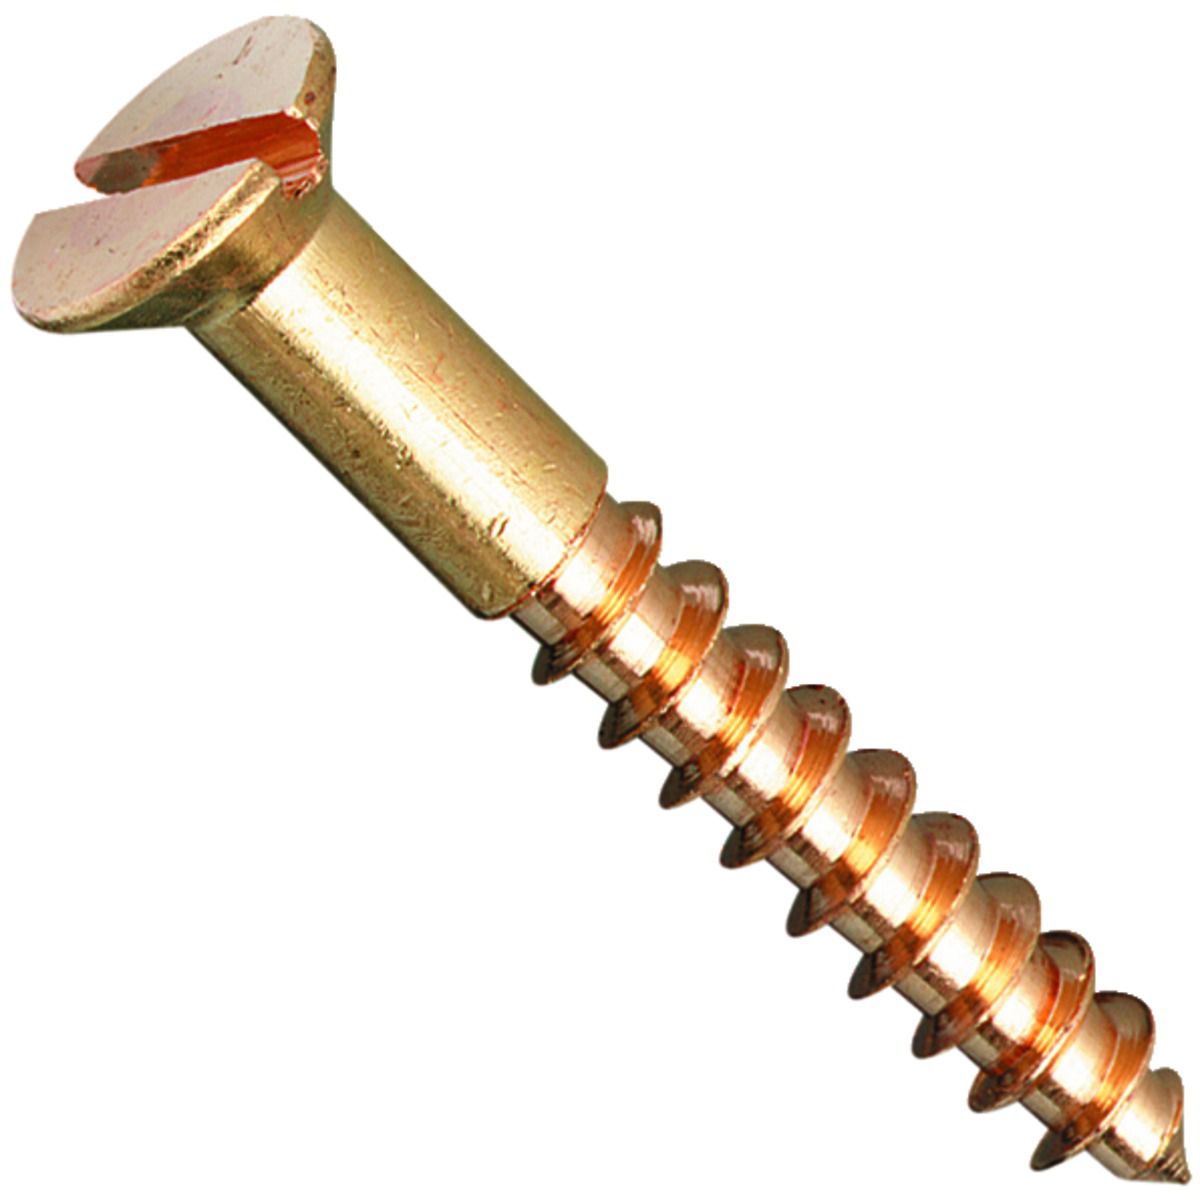 Image of Wickes Brass Wood Screws - No 6 x 19mm Pack of 20